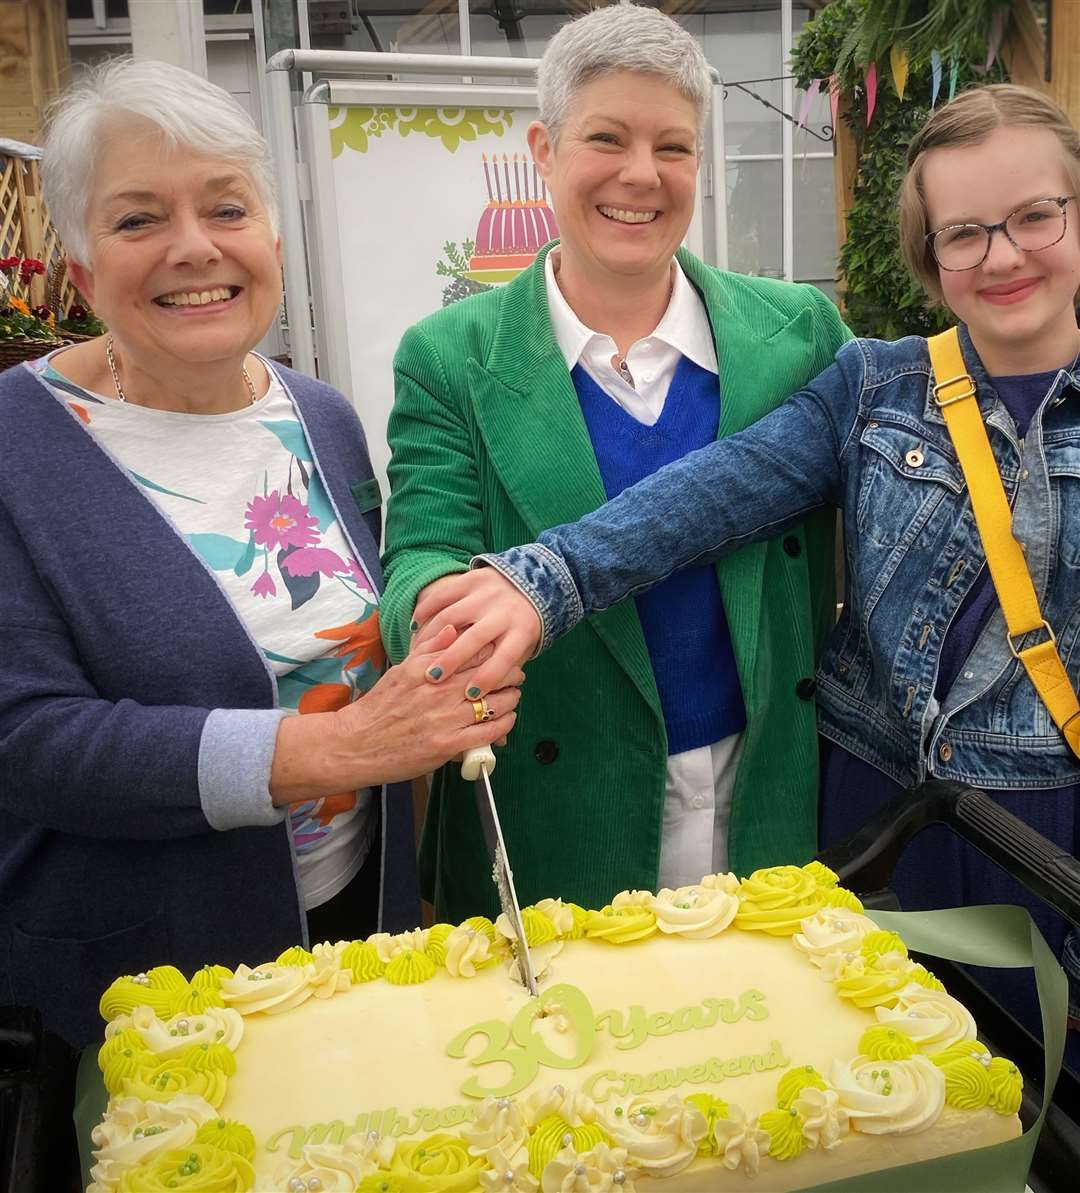 Three generations of Millbrook cutting the 30th birthday celebration cake at Millbrook Gravesend. Left to right: Founder and Chairman of Millbrook Garden Company, Sue Allen, with her daughter, Tammy Woodhouse (Millbrook’s Managing Director) and granddaughter, Ellie. Photo: Millbrook Garden Company